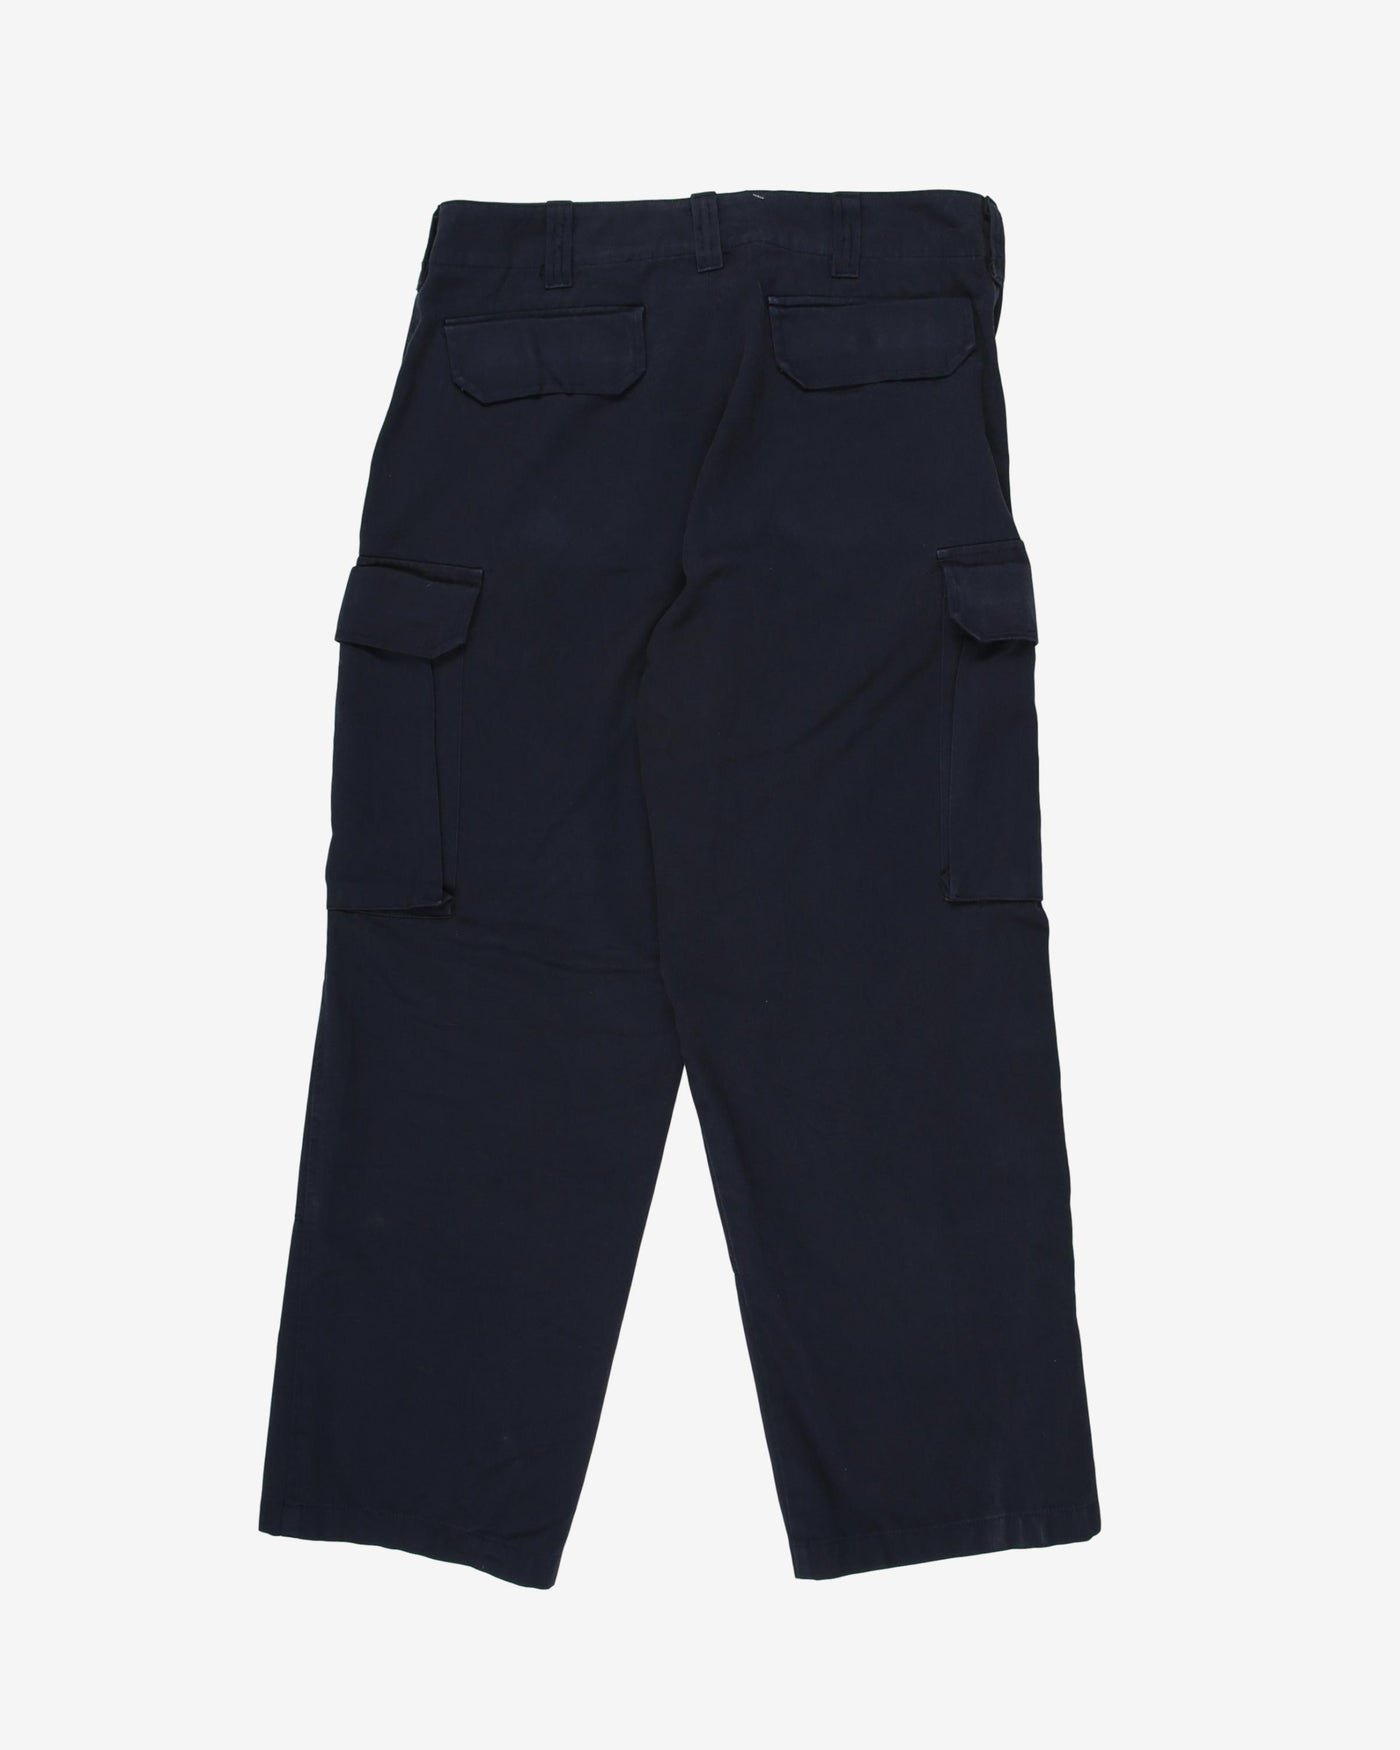 2000s Canadian Navy Blue Cargo Trousers - 36x26